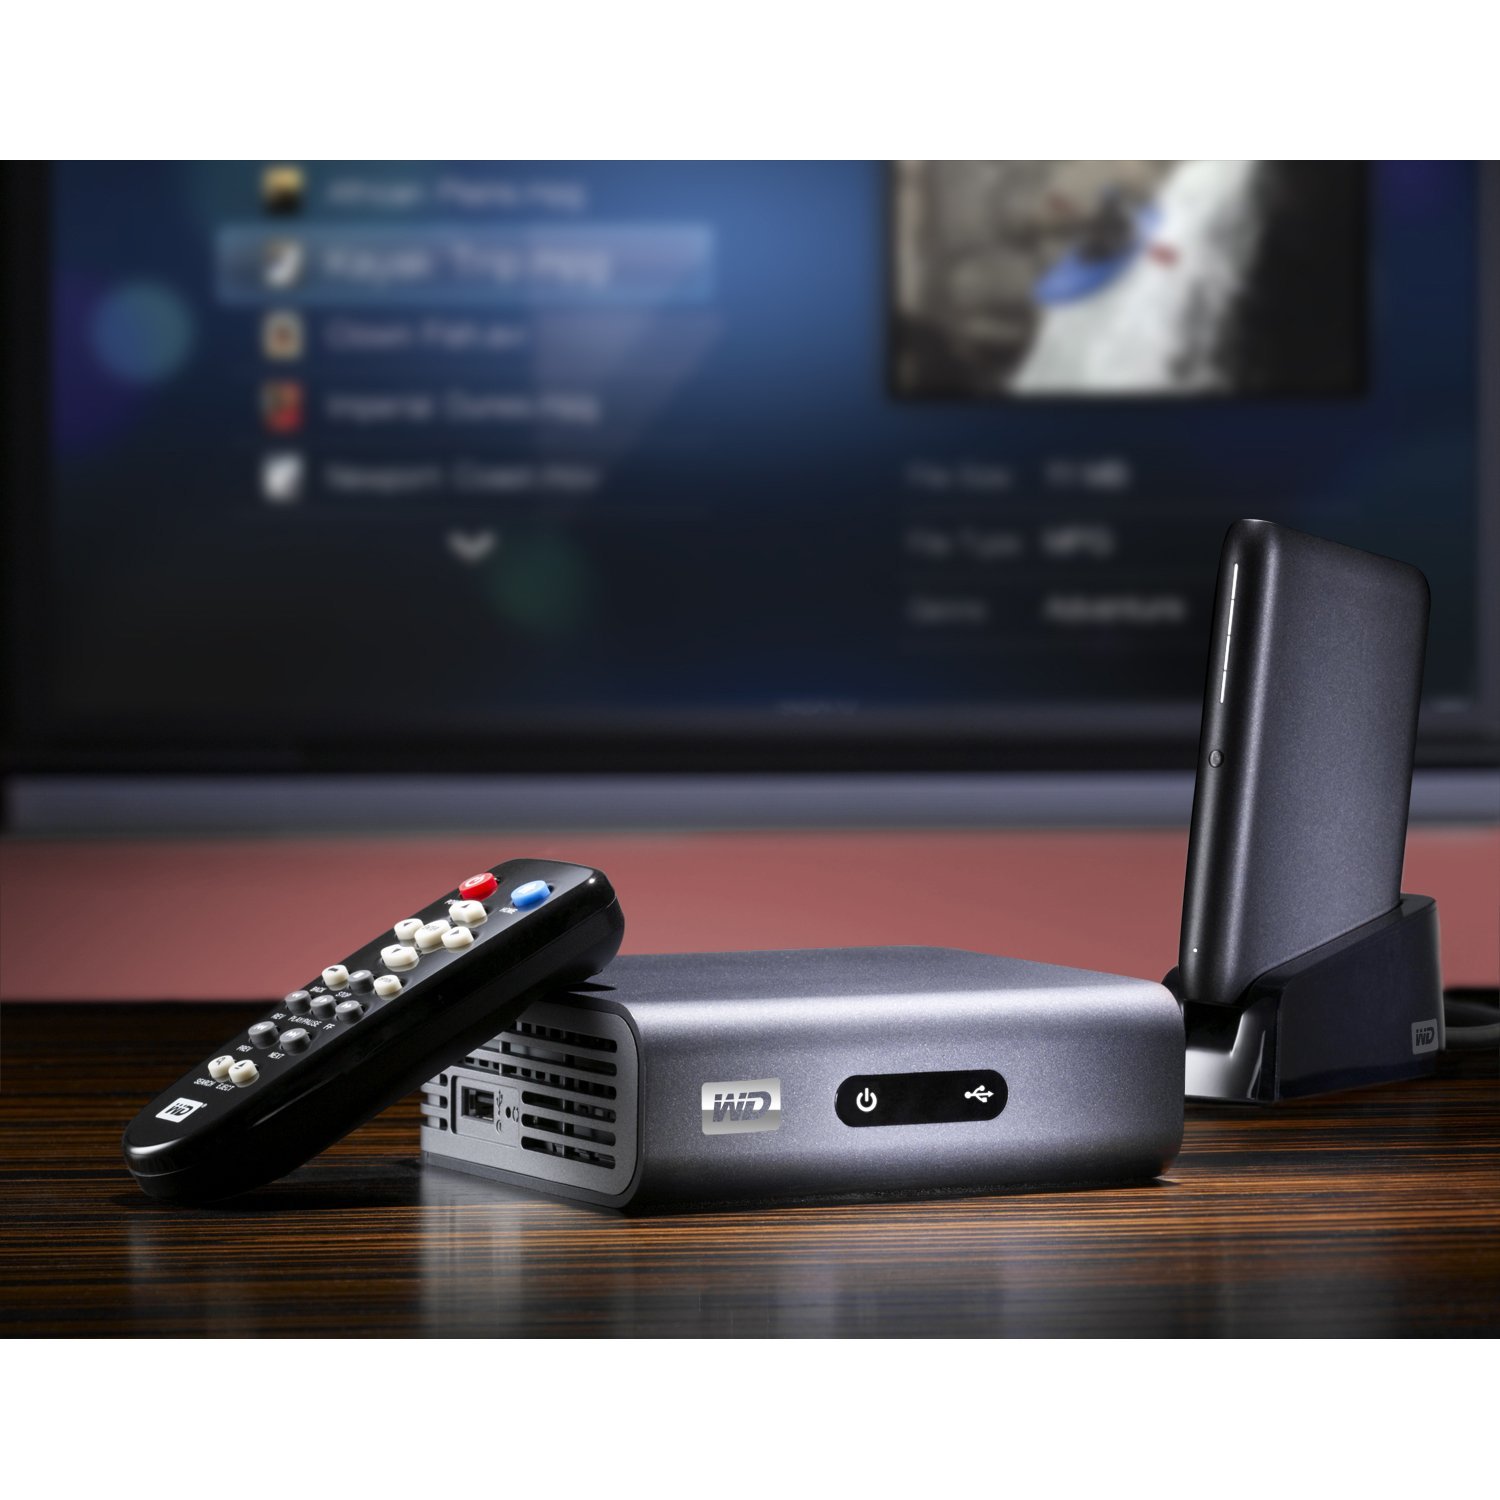 http://thetechjournal.com/wp-content/uploads/images/1107/1312108722-western-digital-wd-tv-live-plus-1080p-hd-media-player-10.jpg